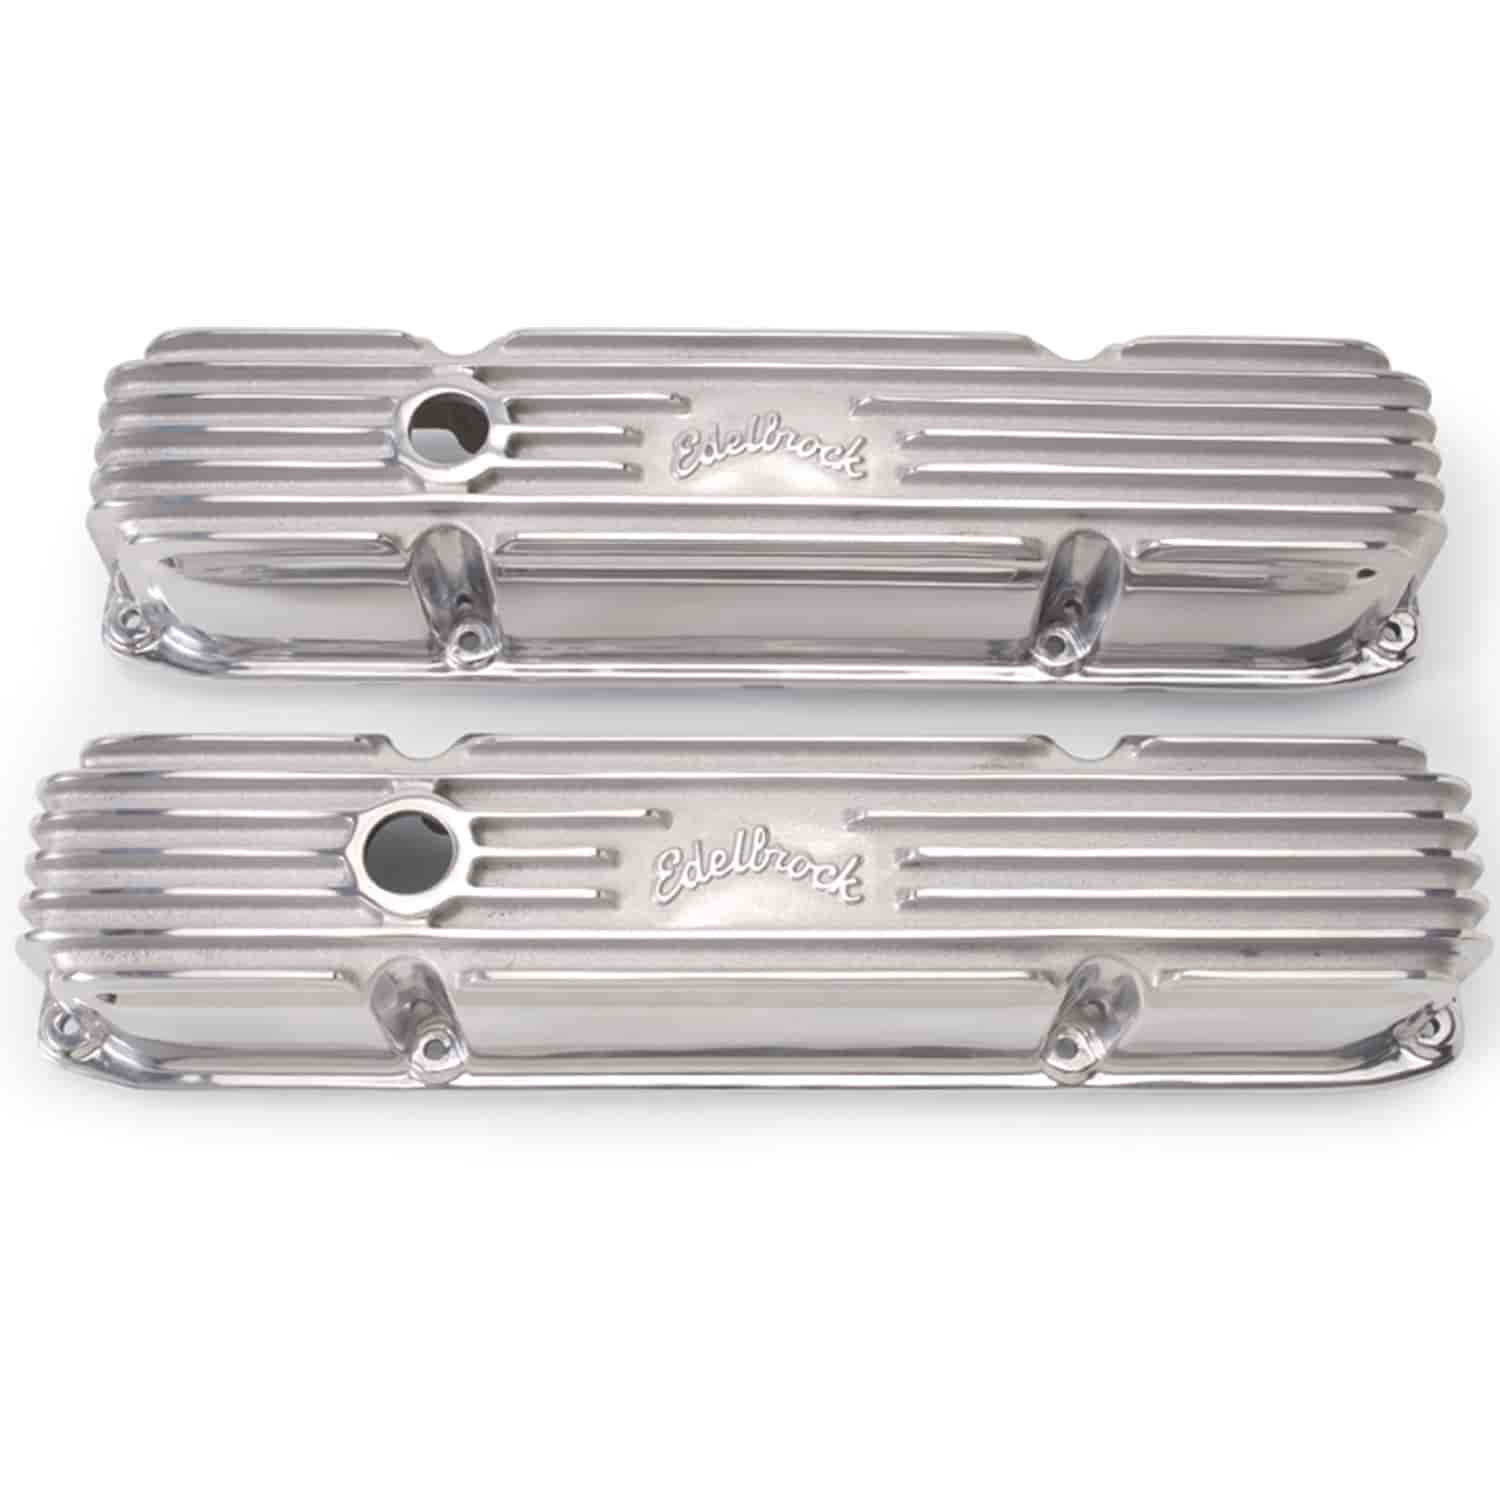 Classic Finned Valve Covers for Big Block Chrysler 383-440 with Polished Finish